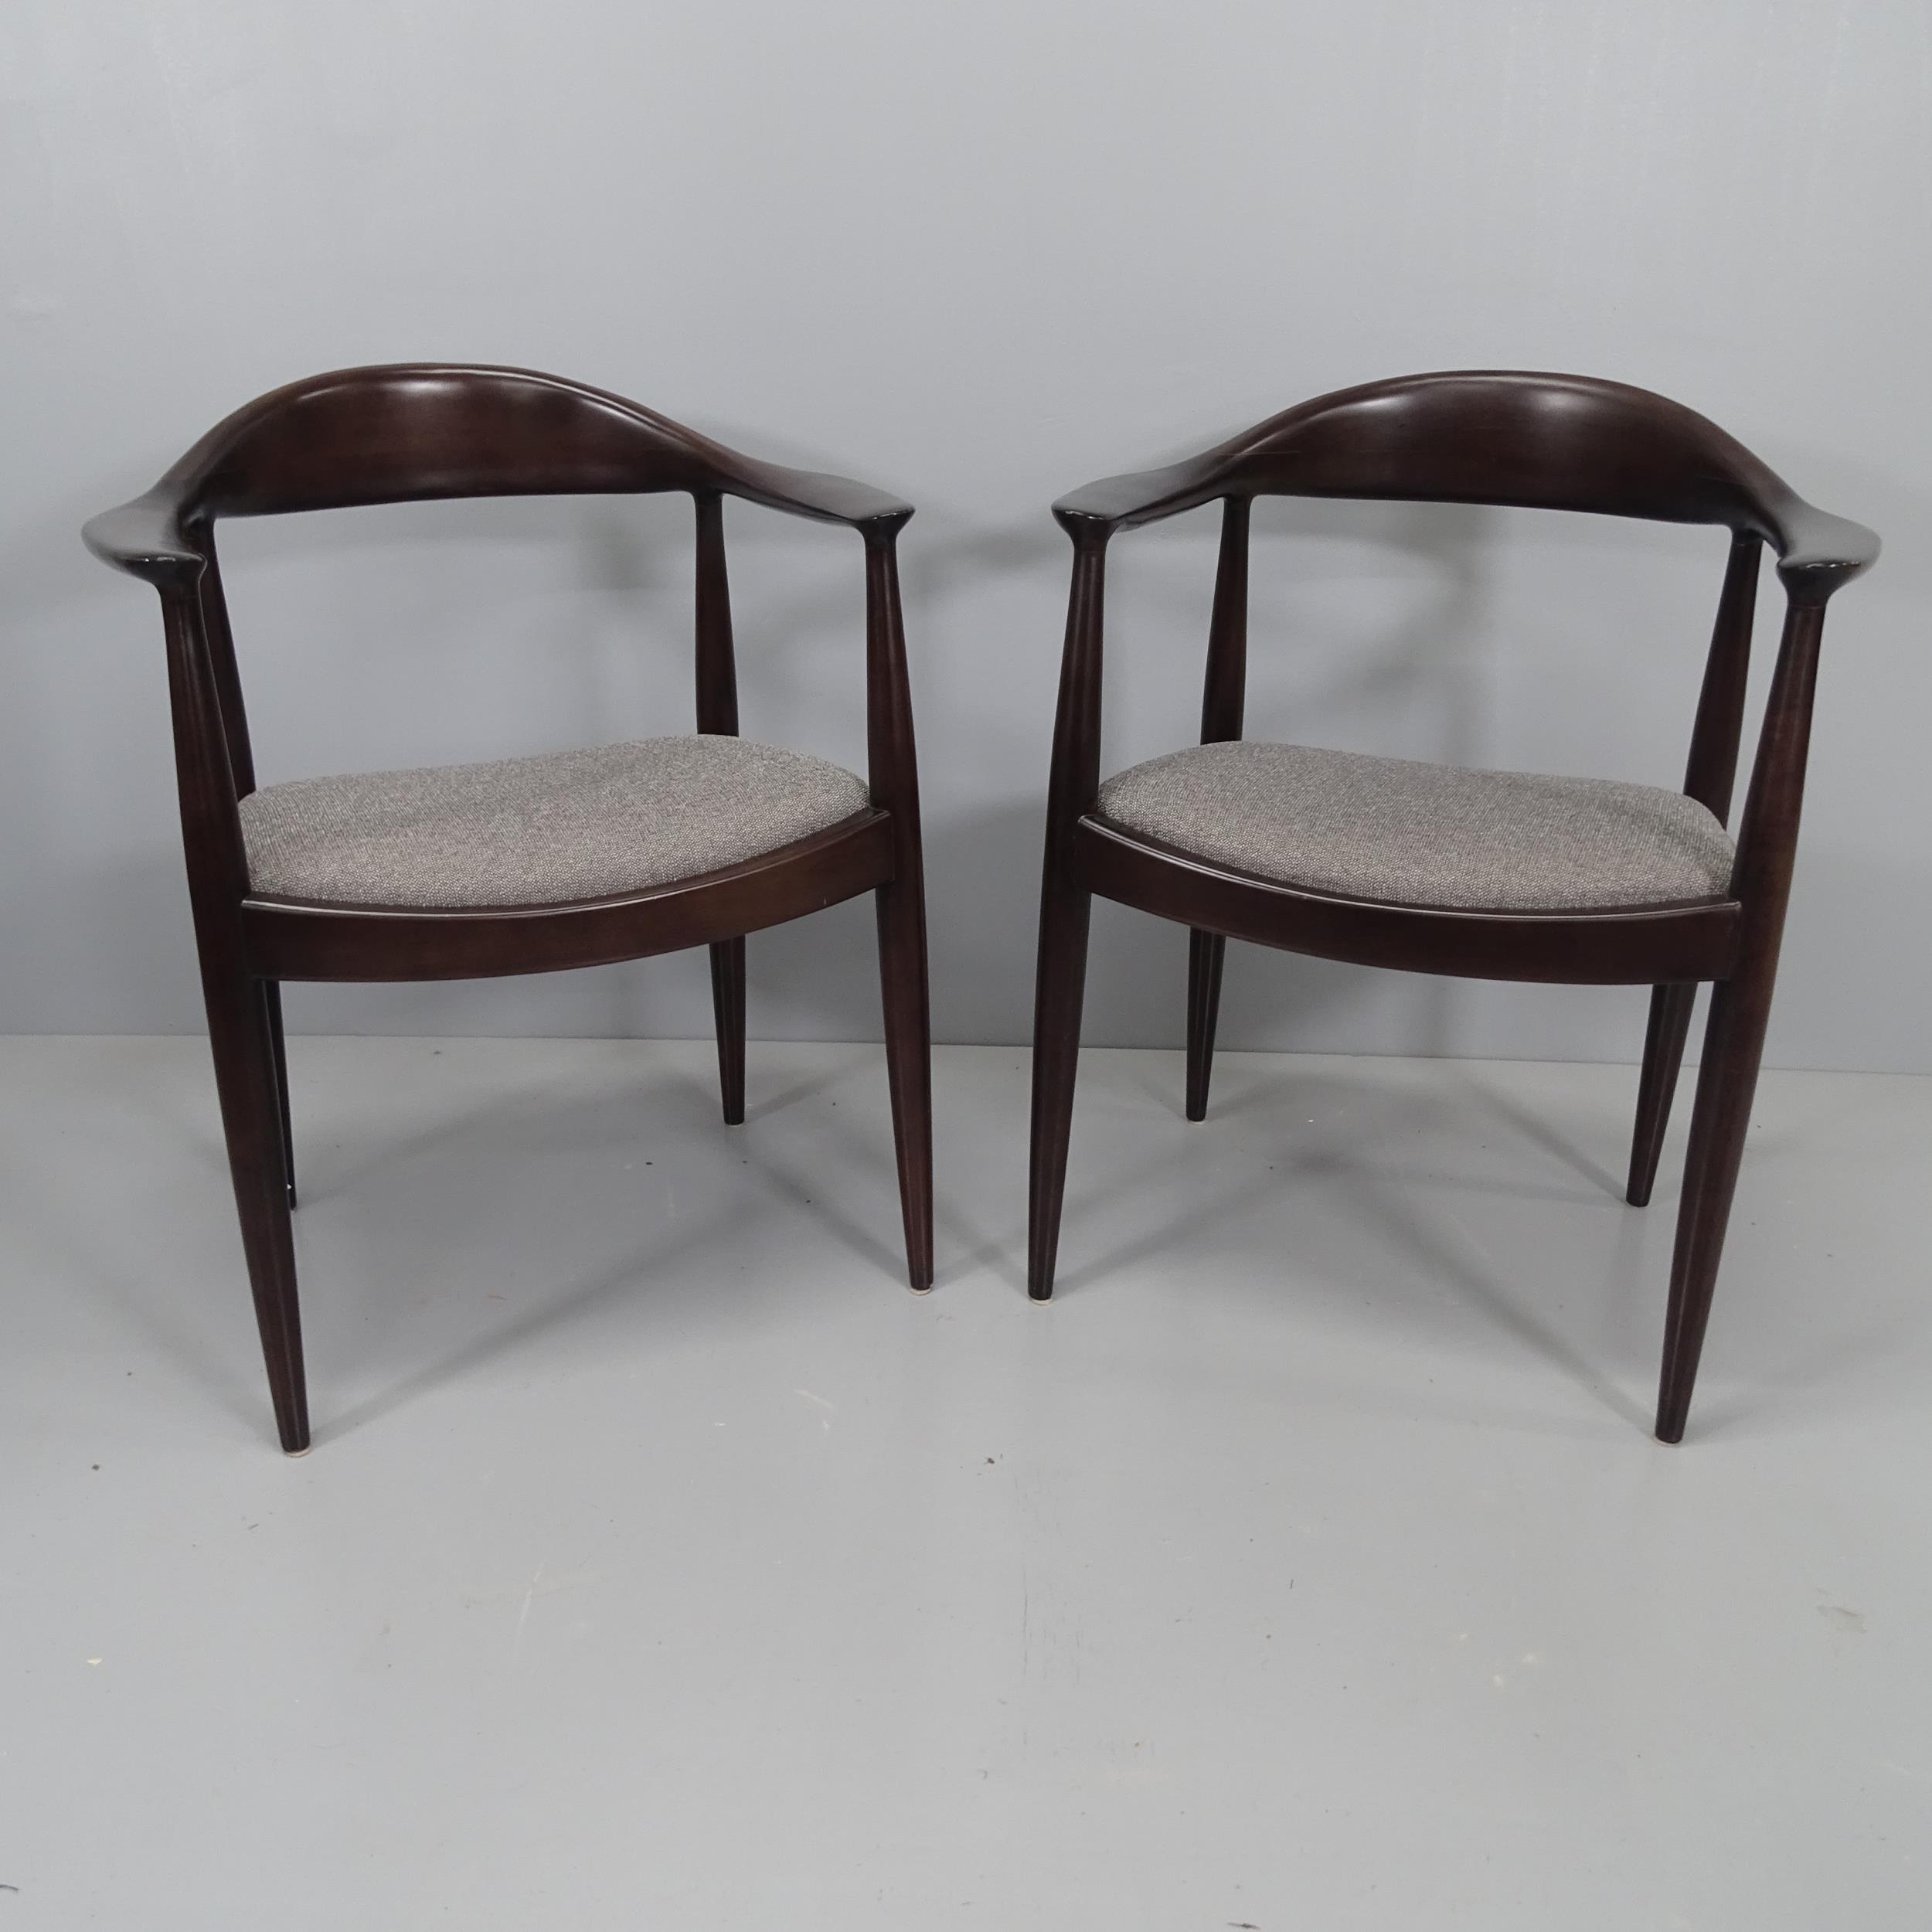 A pair of Hans Wegner Kennedy style armchairs in the mid-century Danish manner.